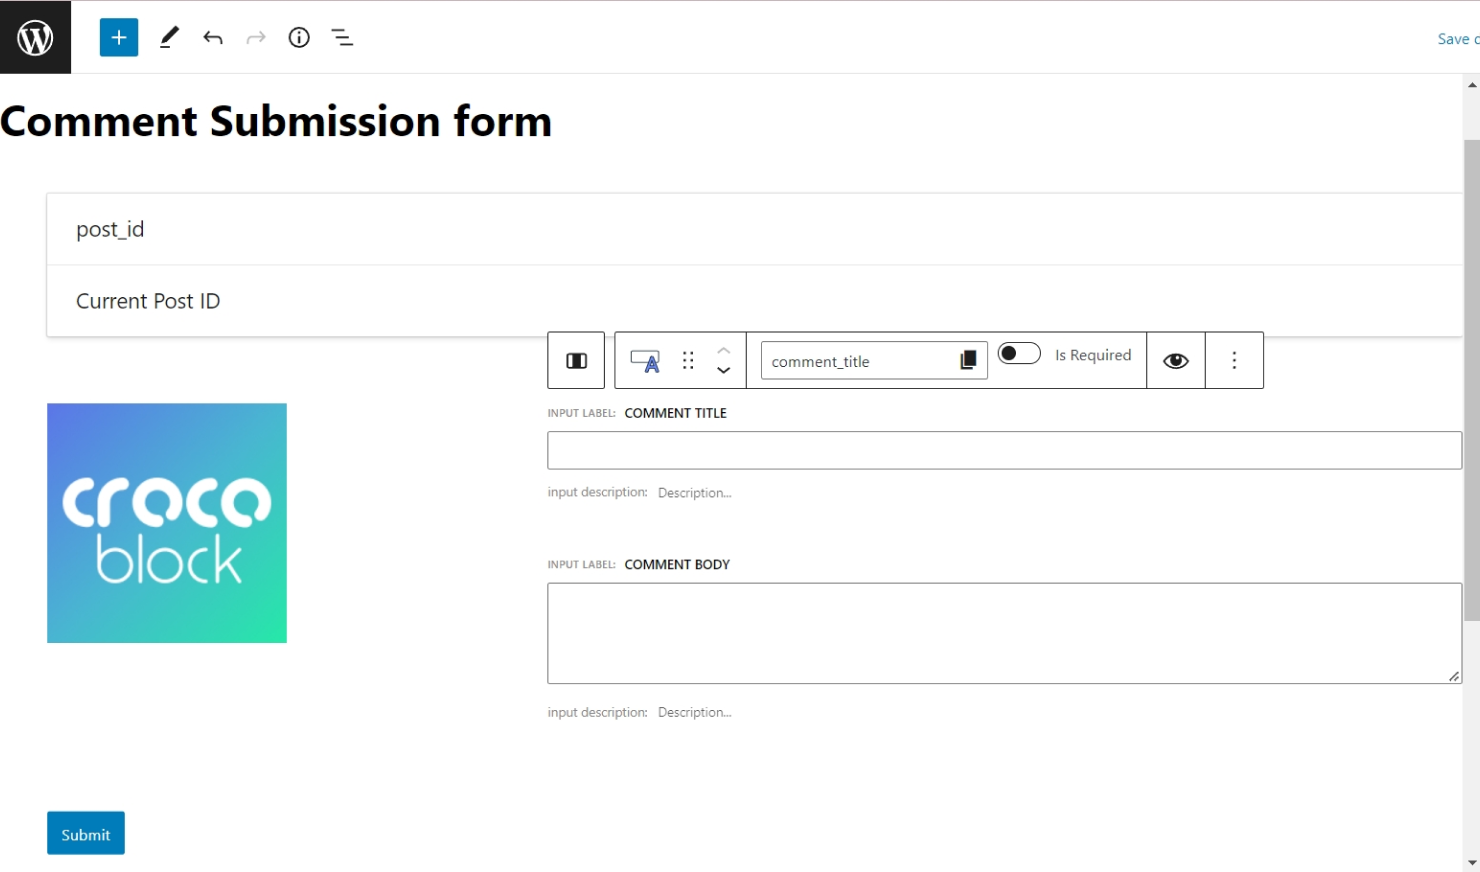 designing the form for comment submissions